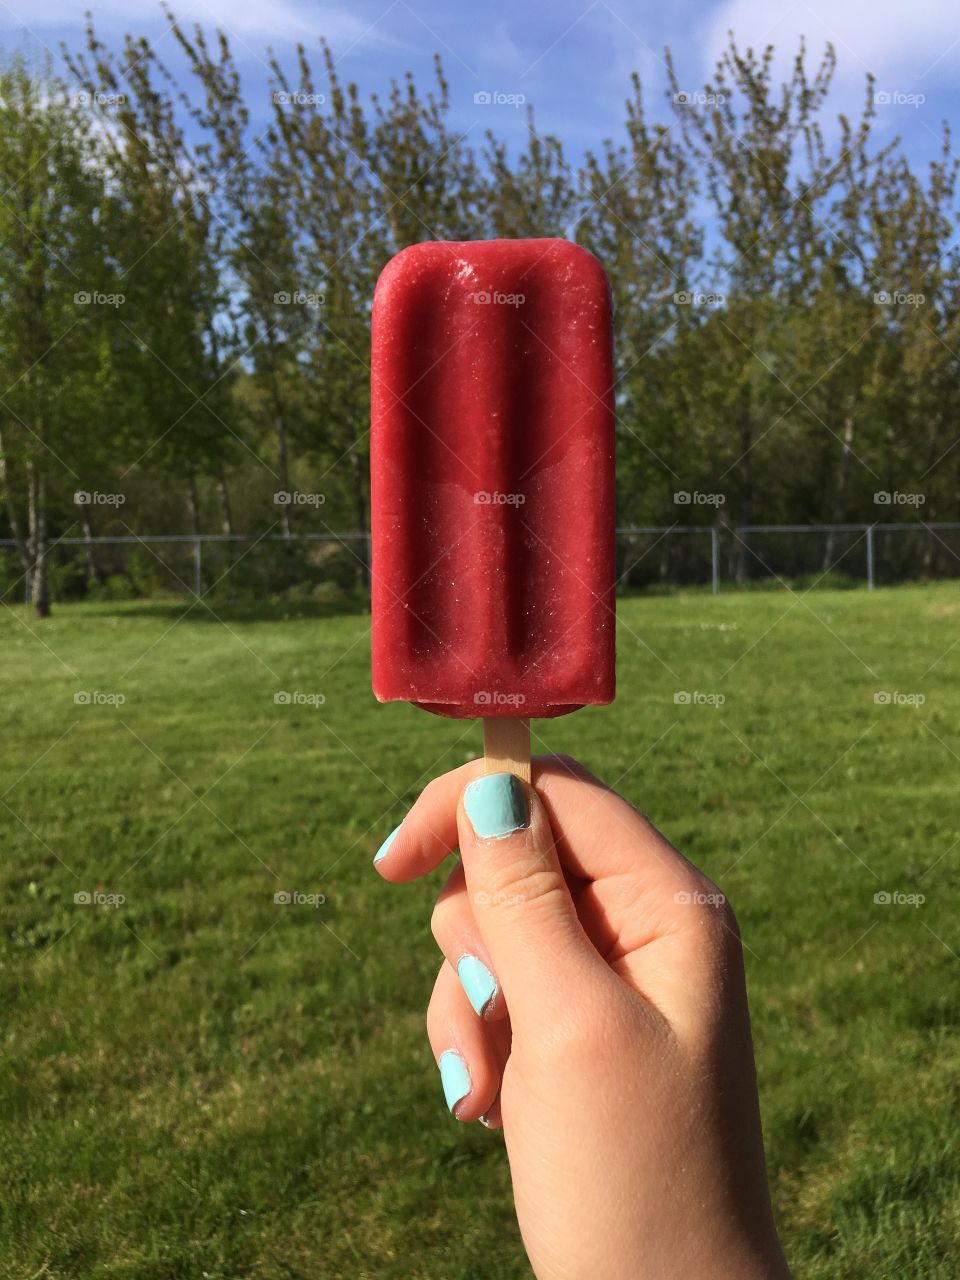 Holding a red popsicle on beautiful weather day